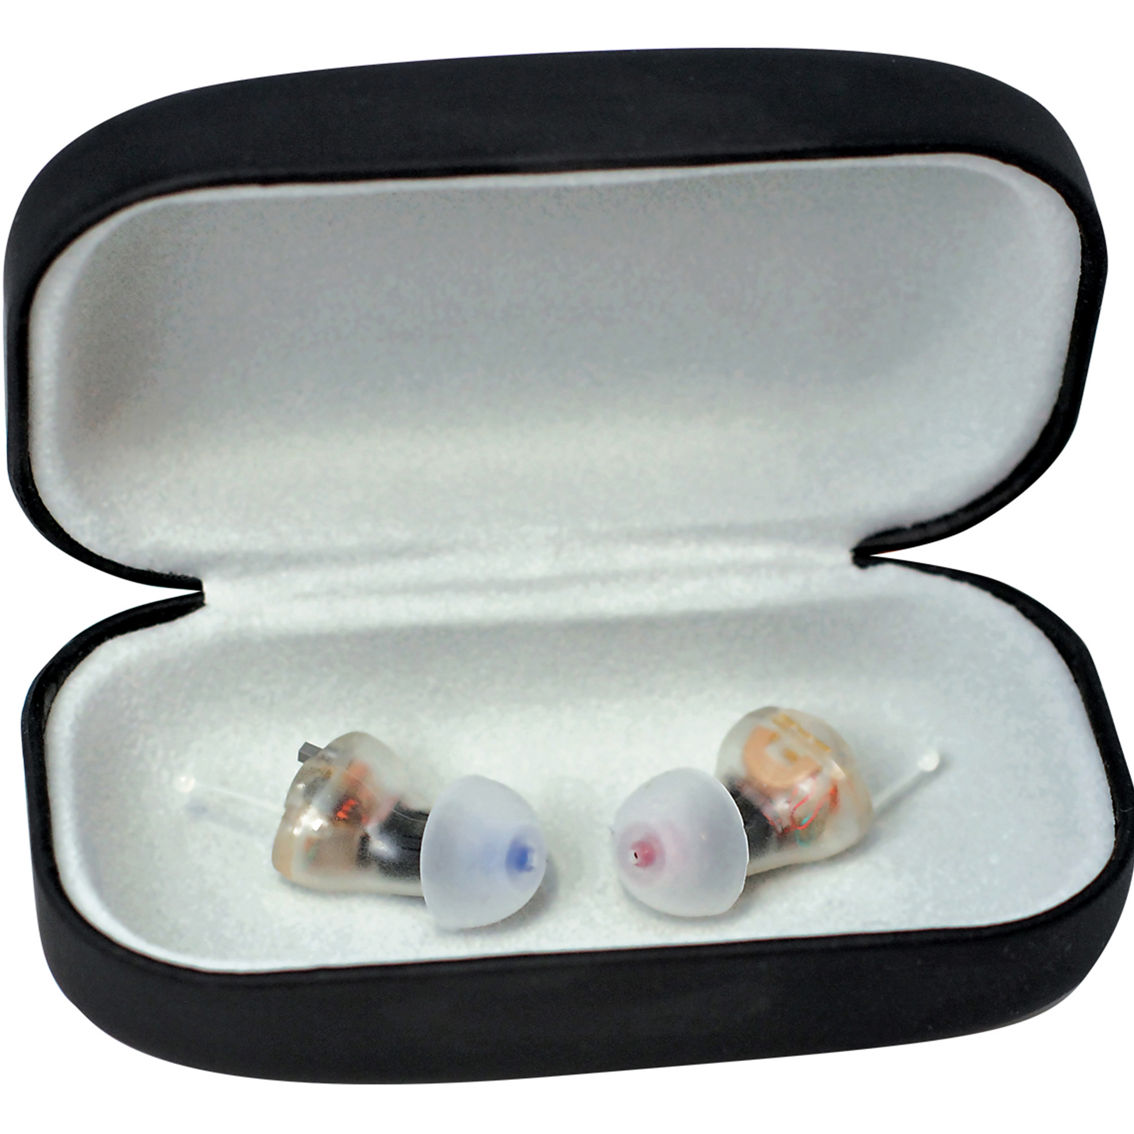 Lucid Hearing Enrich Pro OTC In the Ear Hearing Aid - Image 3 of 5